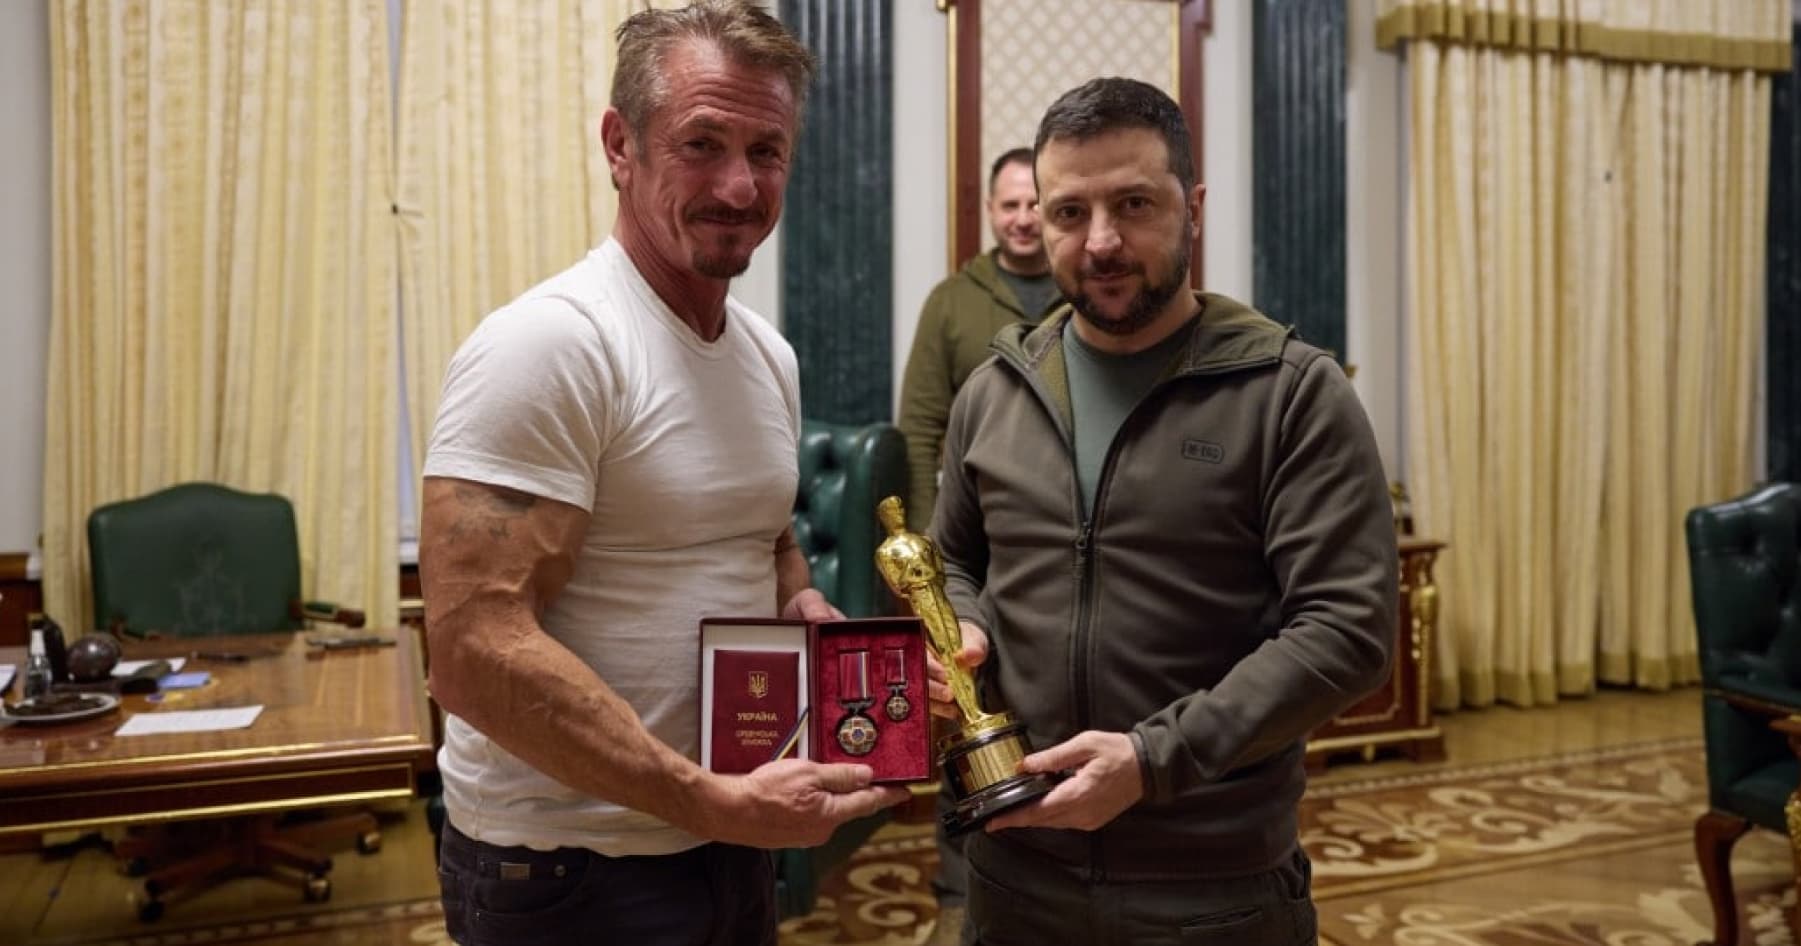 American actor and director Sean Penn visited Ukraine for the third time during the full-scale war